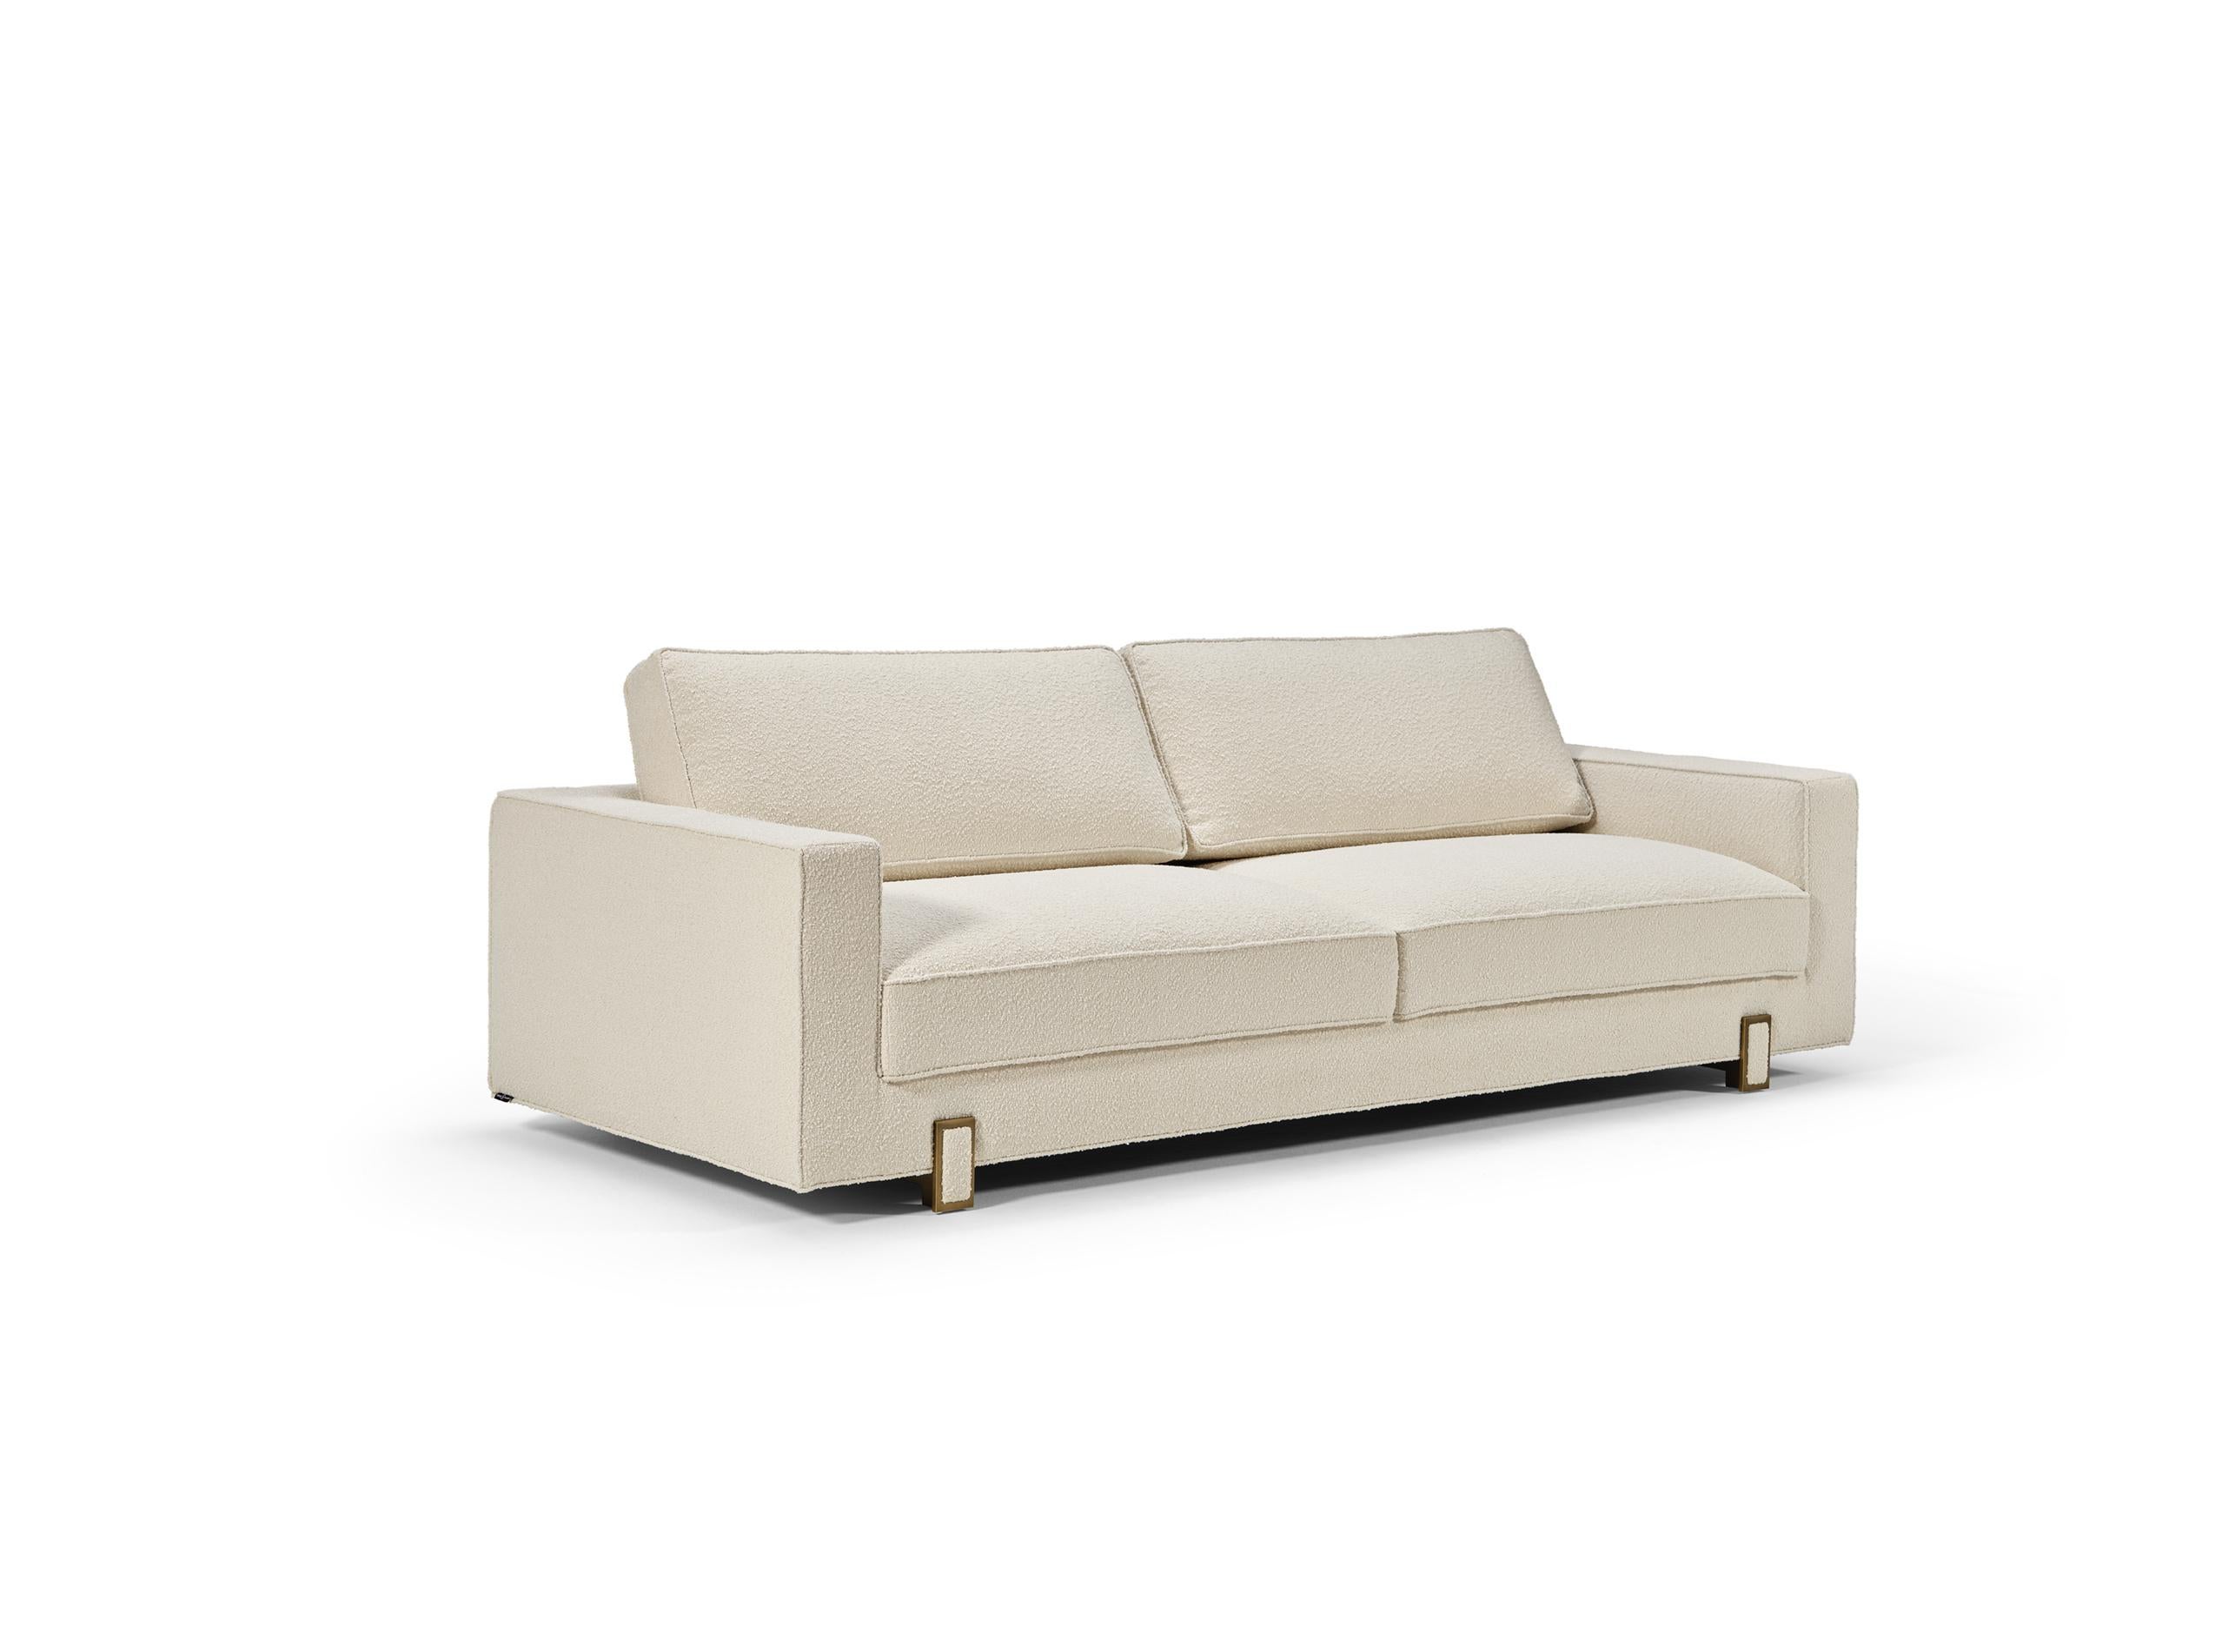 LUSO sofa is a very delicate piece, with special details, designed to be used on a daily basis.‎ Upholstered with two fabrics, using a contrasting piping for an refined result.‎ The feet, in antique brass color, have a fabric detail at the center,